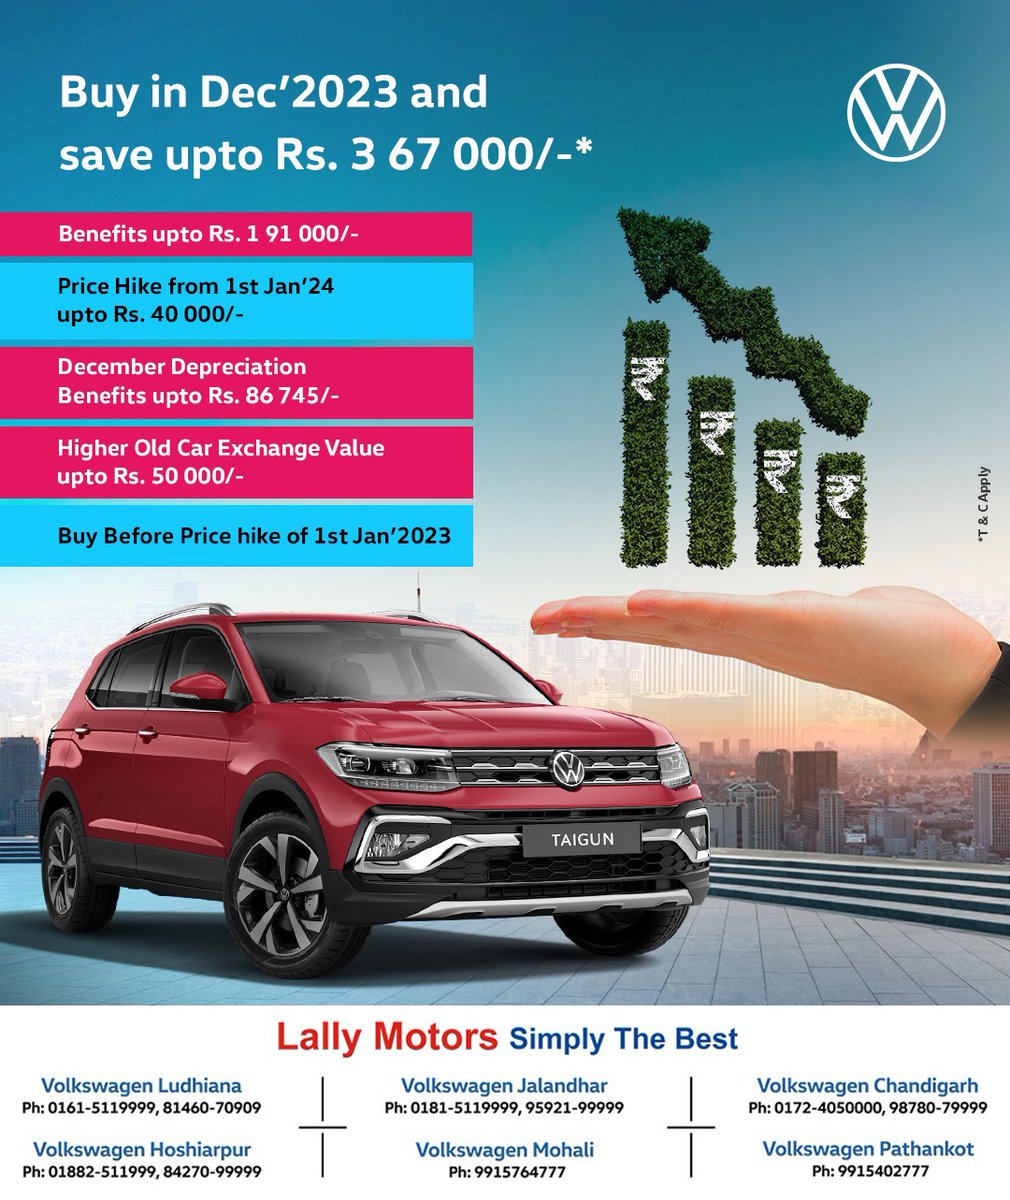 Don't let the savings slip away! Purchase your car in December and unlock benefits up to Rs. 3,67,000*! 🌟 Beat the price hike on Jan 1, 2024, and enjoy the added perks of December Depreciation Benefits and a Higher Old Car Exchange Value! 🚙💨 

#CarSavings #DecemberDeals